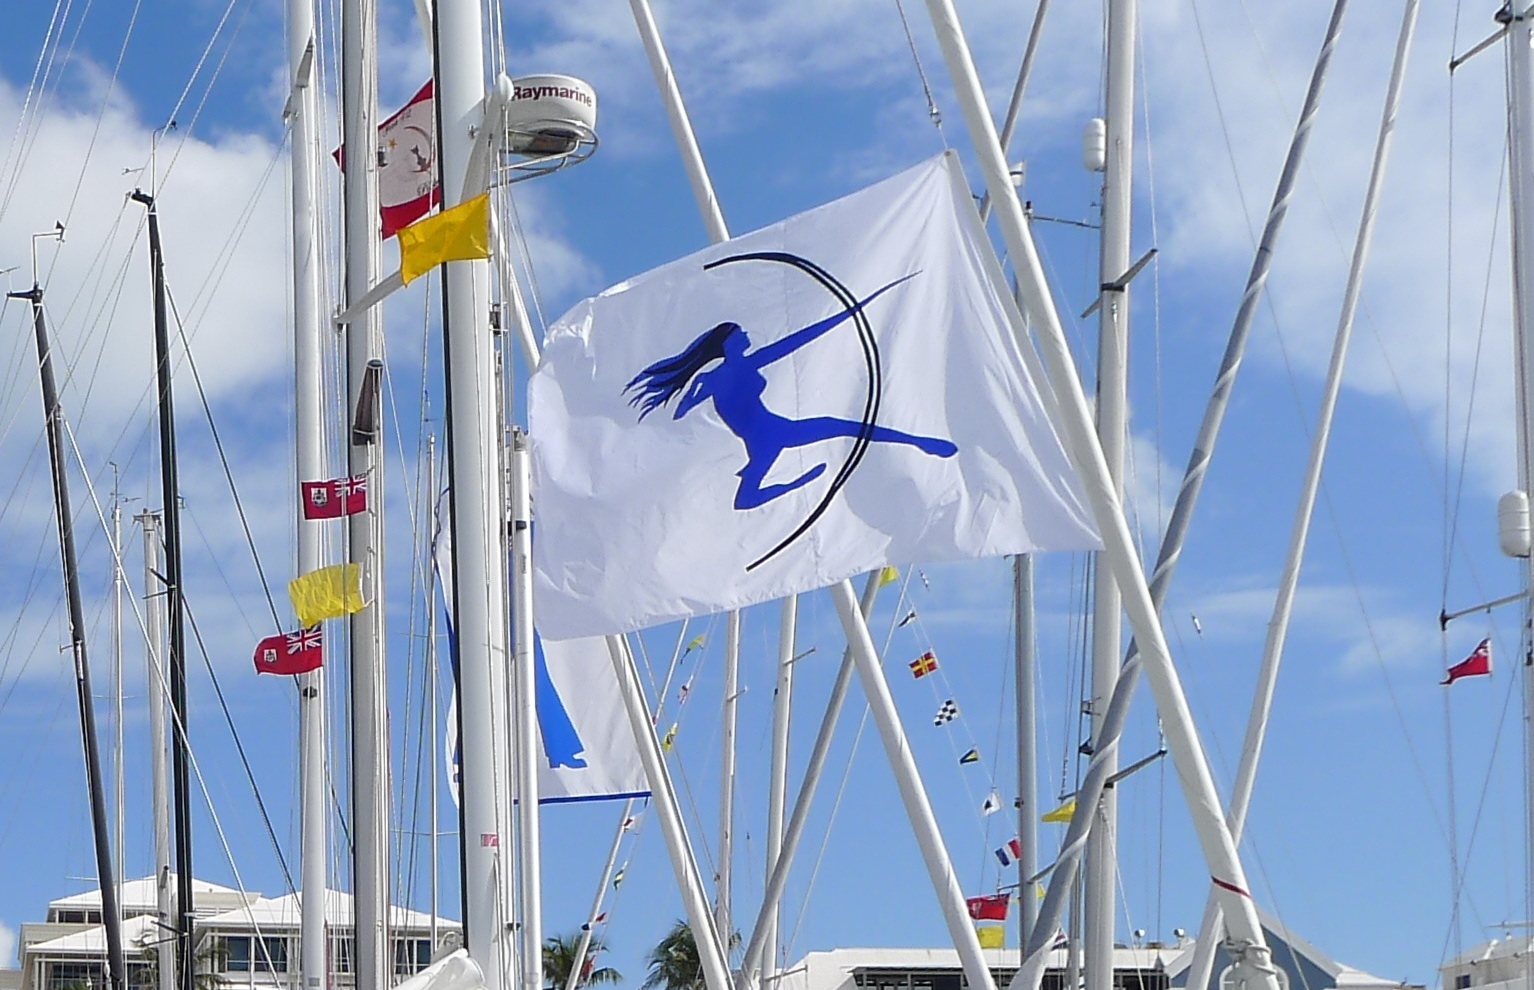 Racing banner for a sailing yacht.